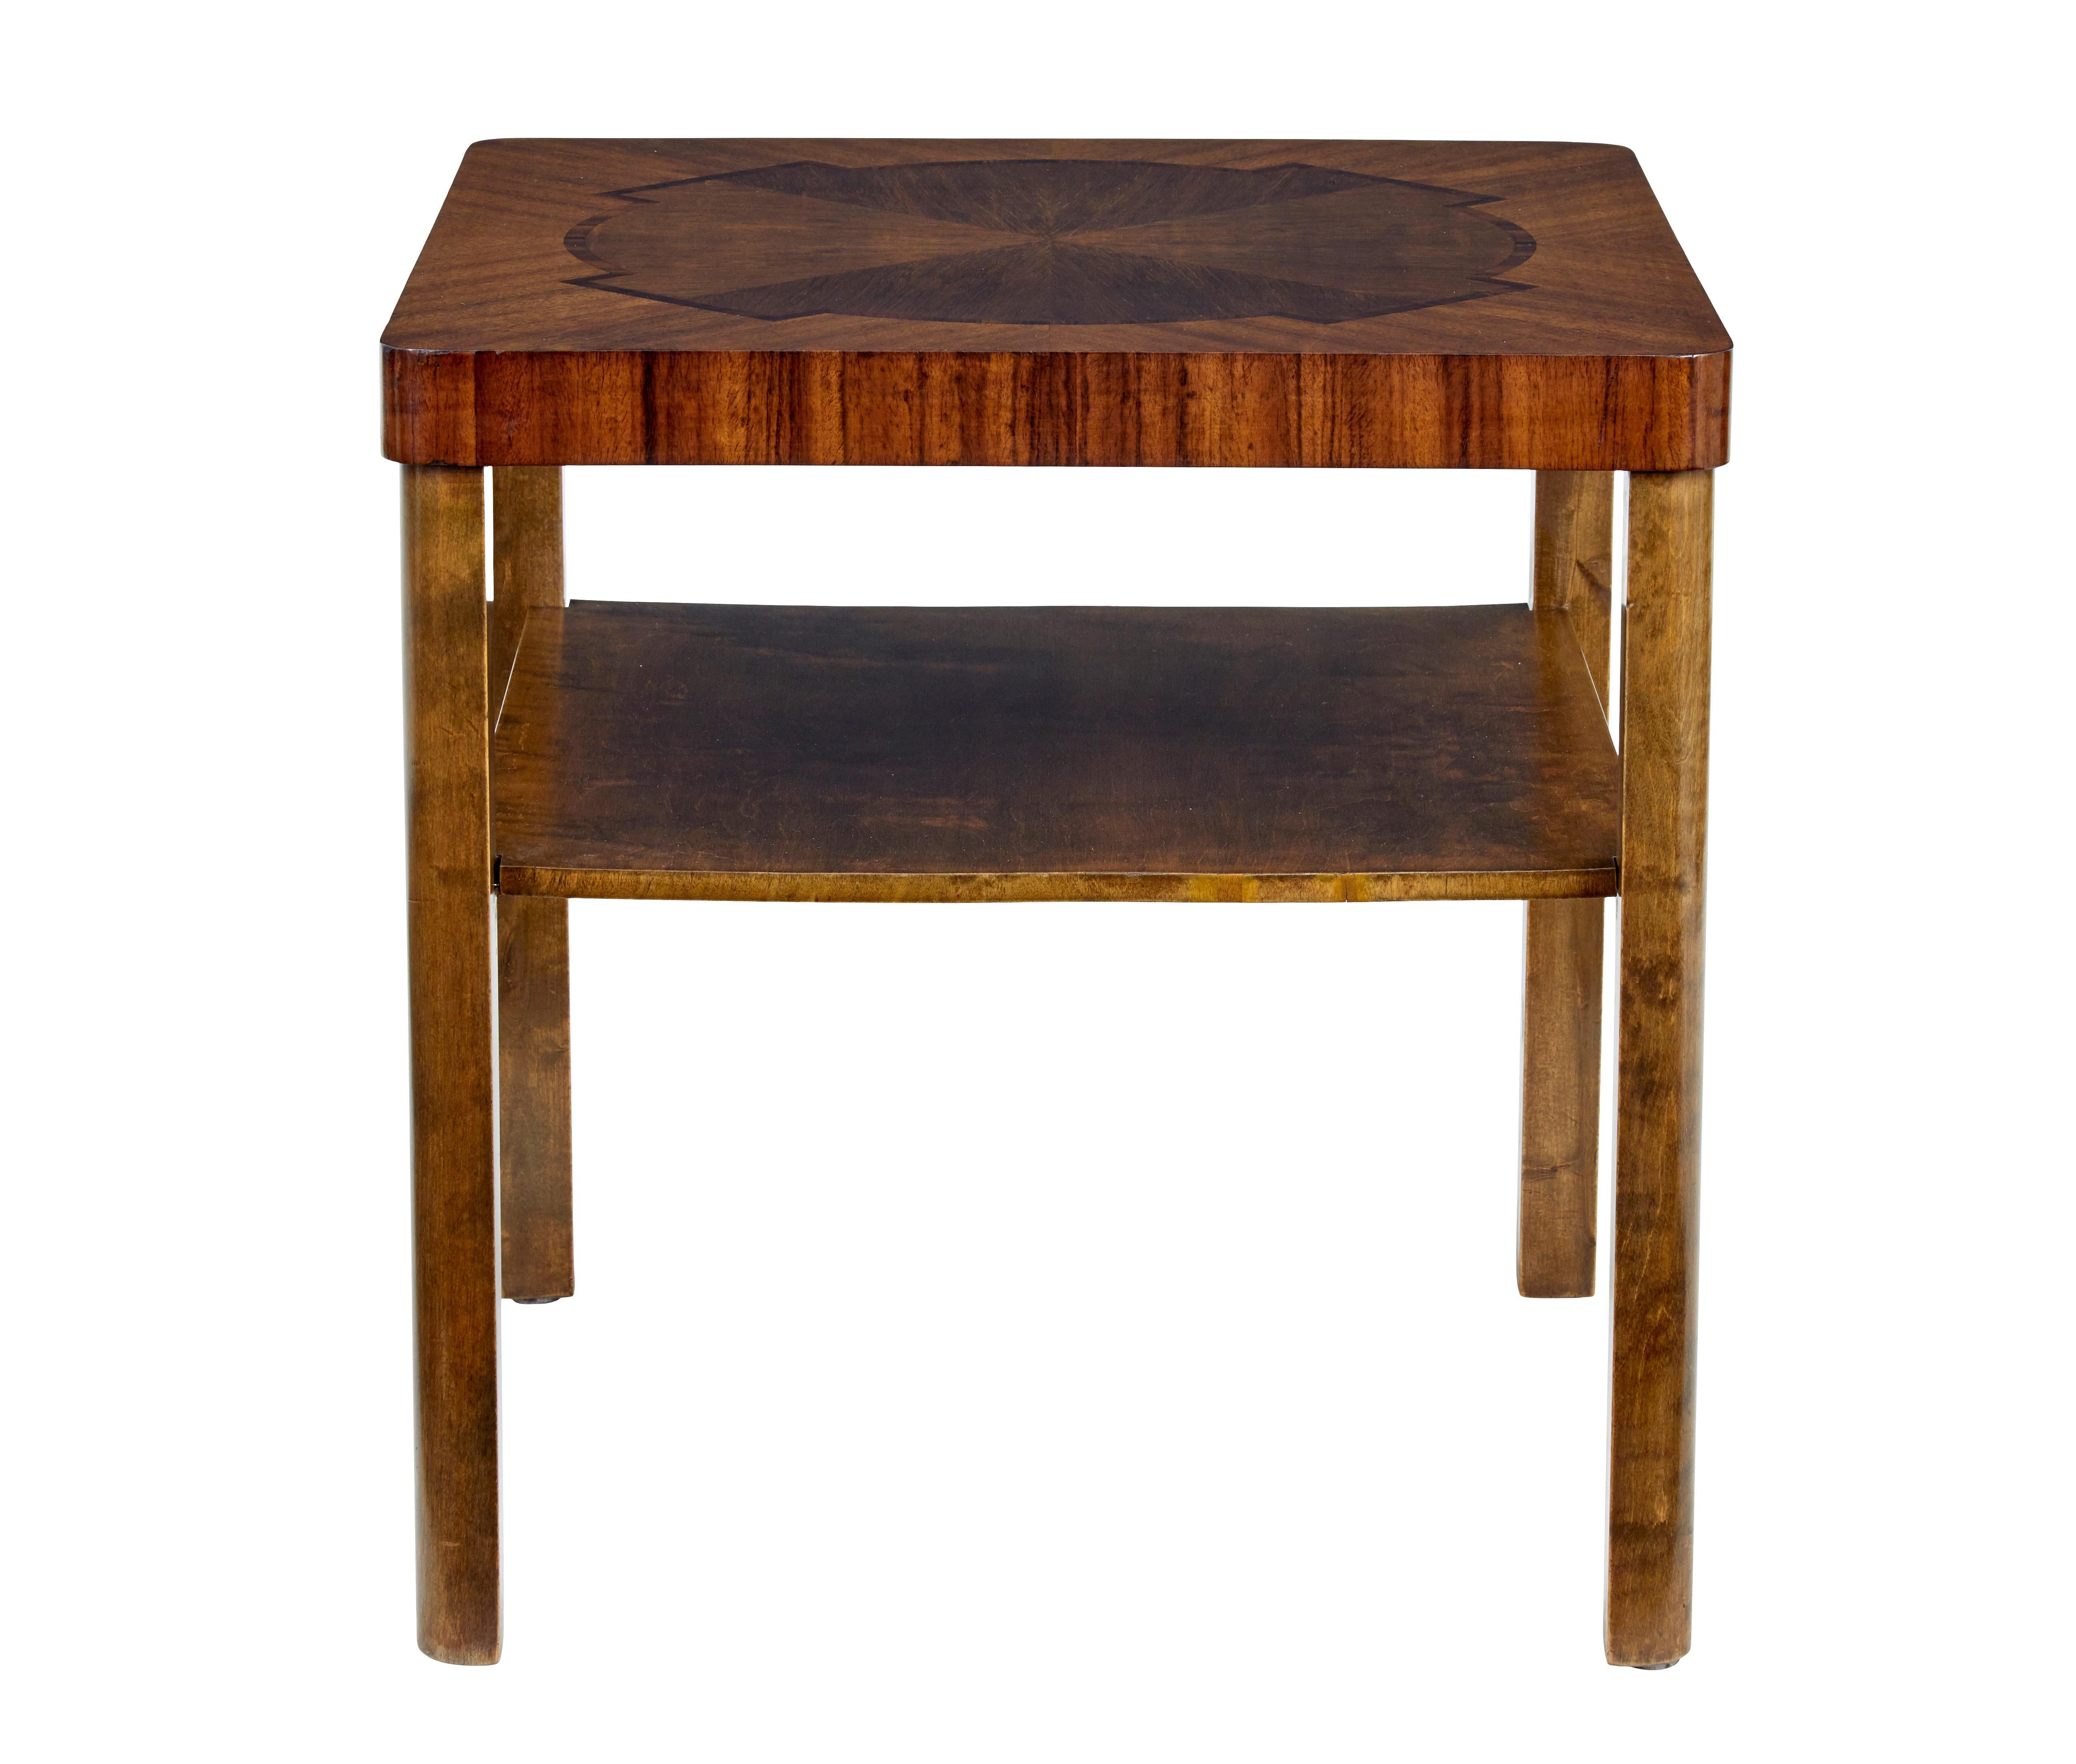 Mid 20th century walnut and birch inlaid coffee table circa 1950.

Square shaped coffee table with rounded edges.  Walnut top with palisander motif design to the top, with further palisander veneer around the top edge.

Shaped legs provide support